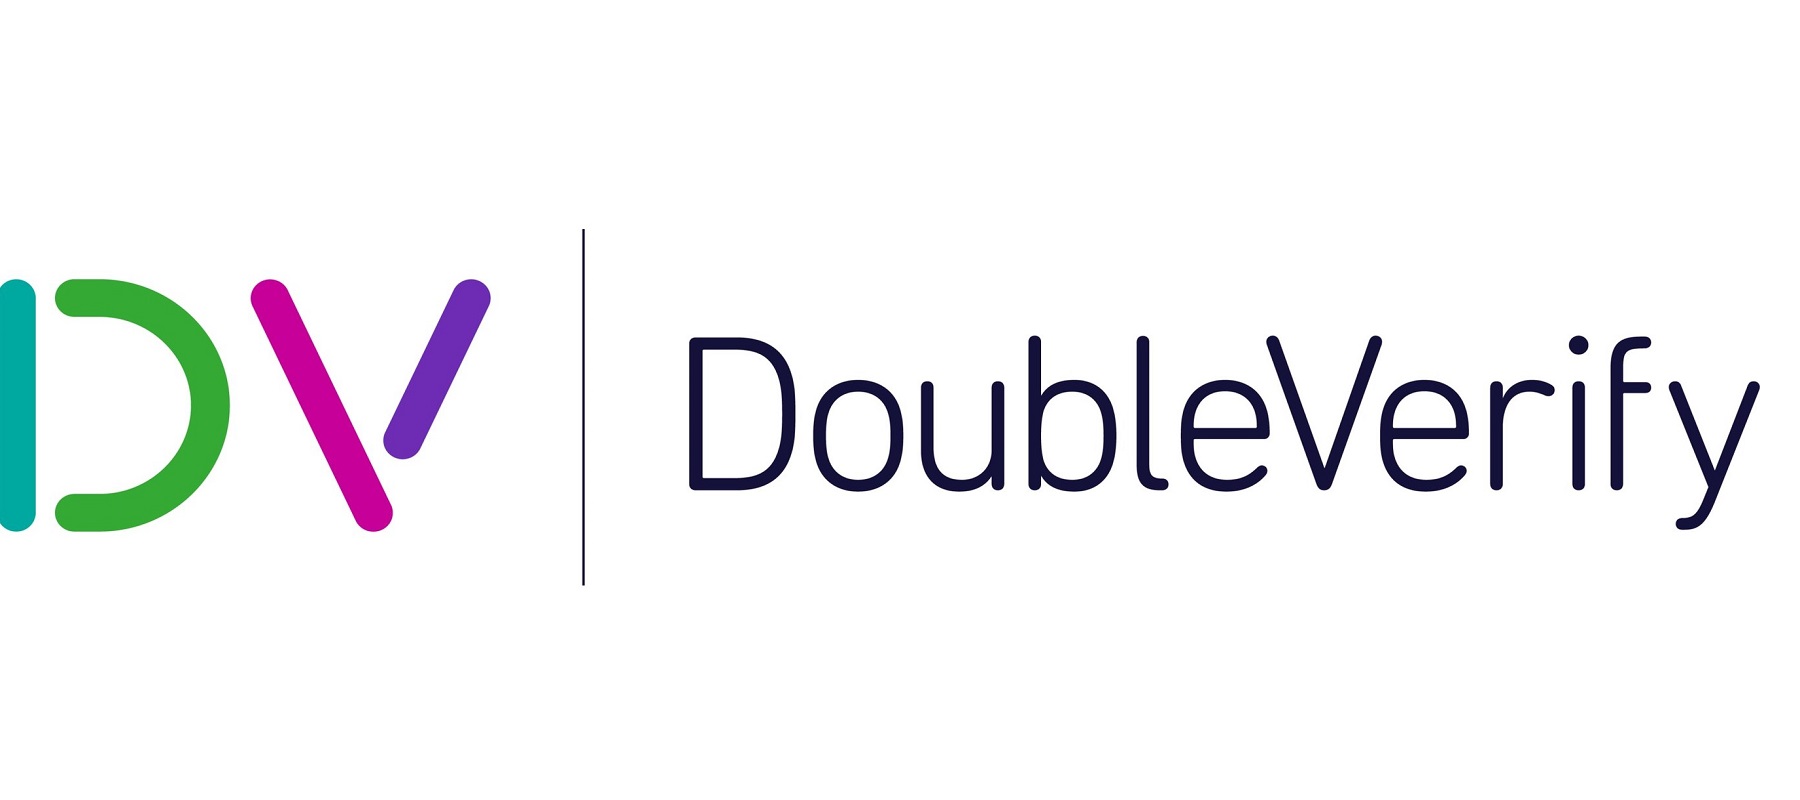 DoubleVerify expands media quality authentication to YouTube shorts and other formats